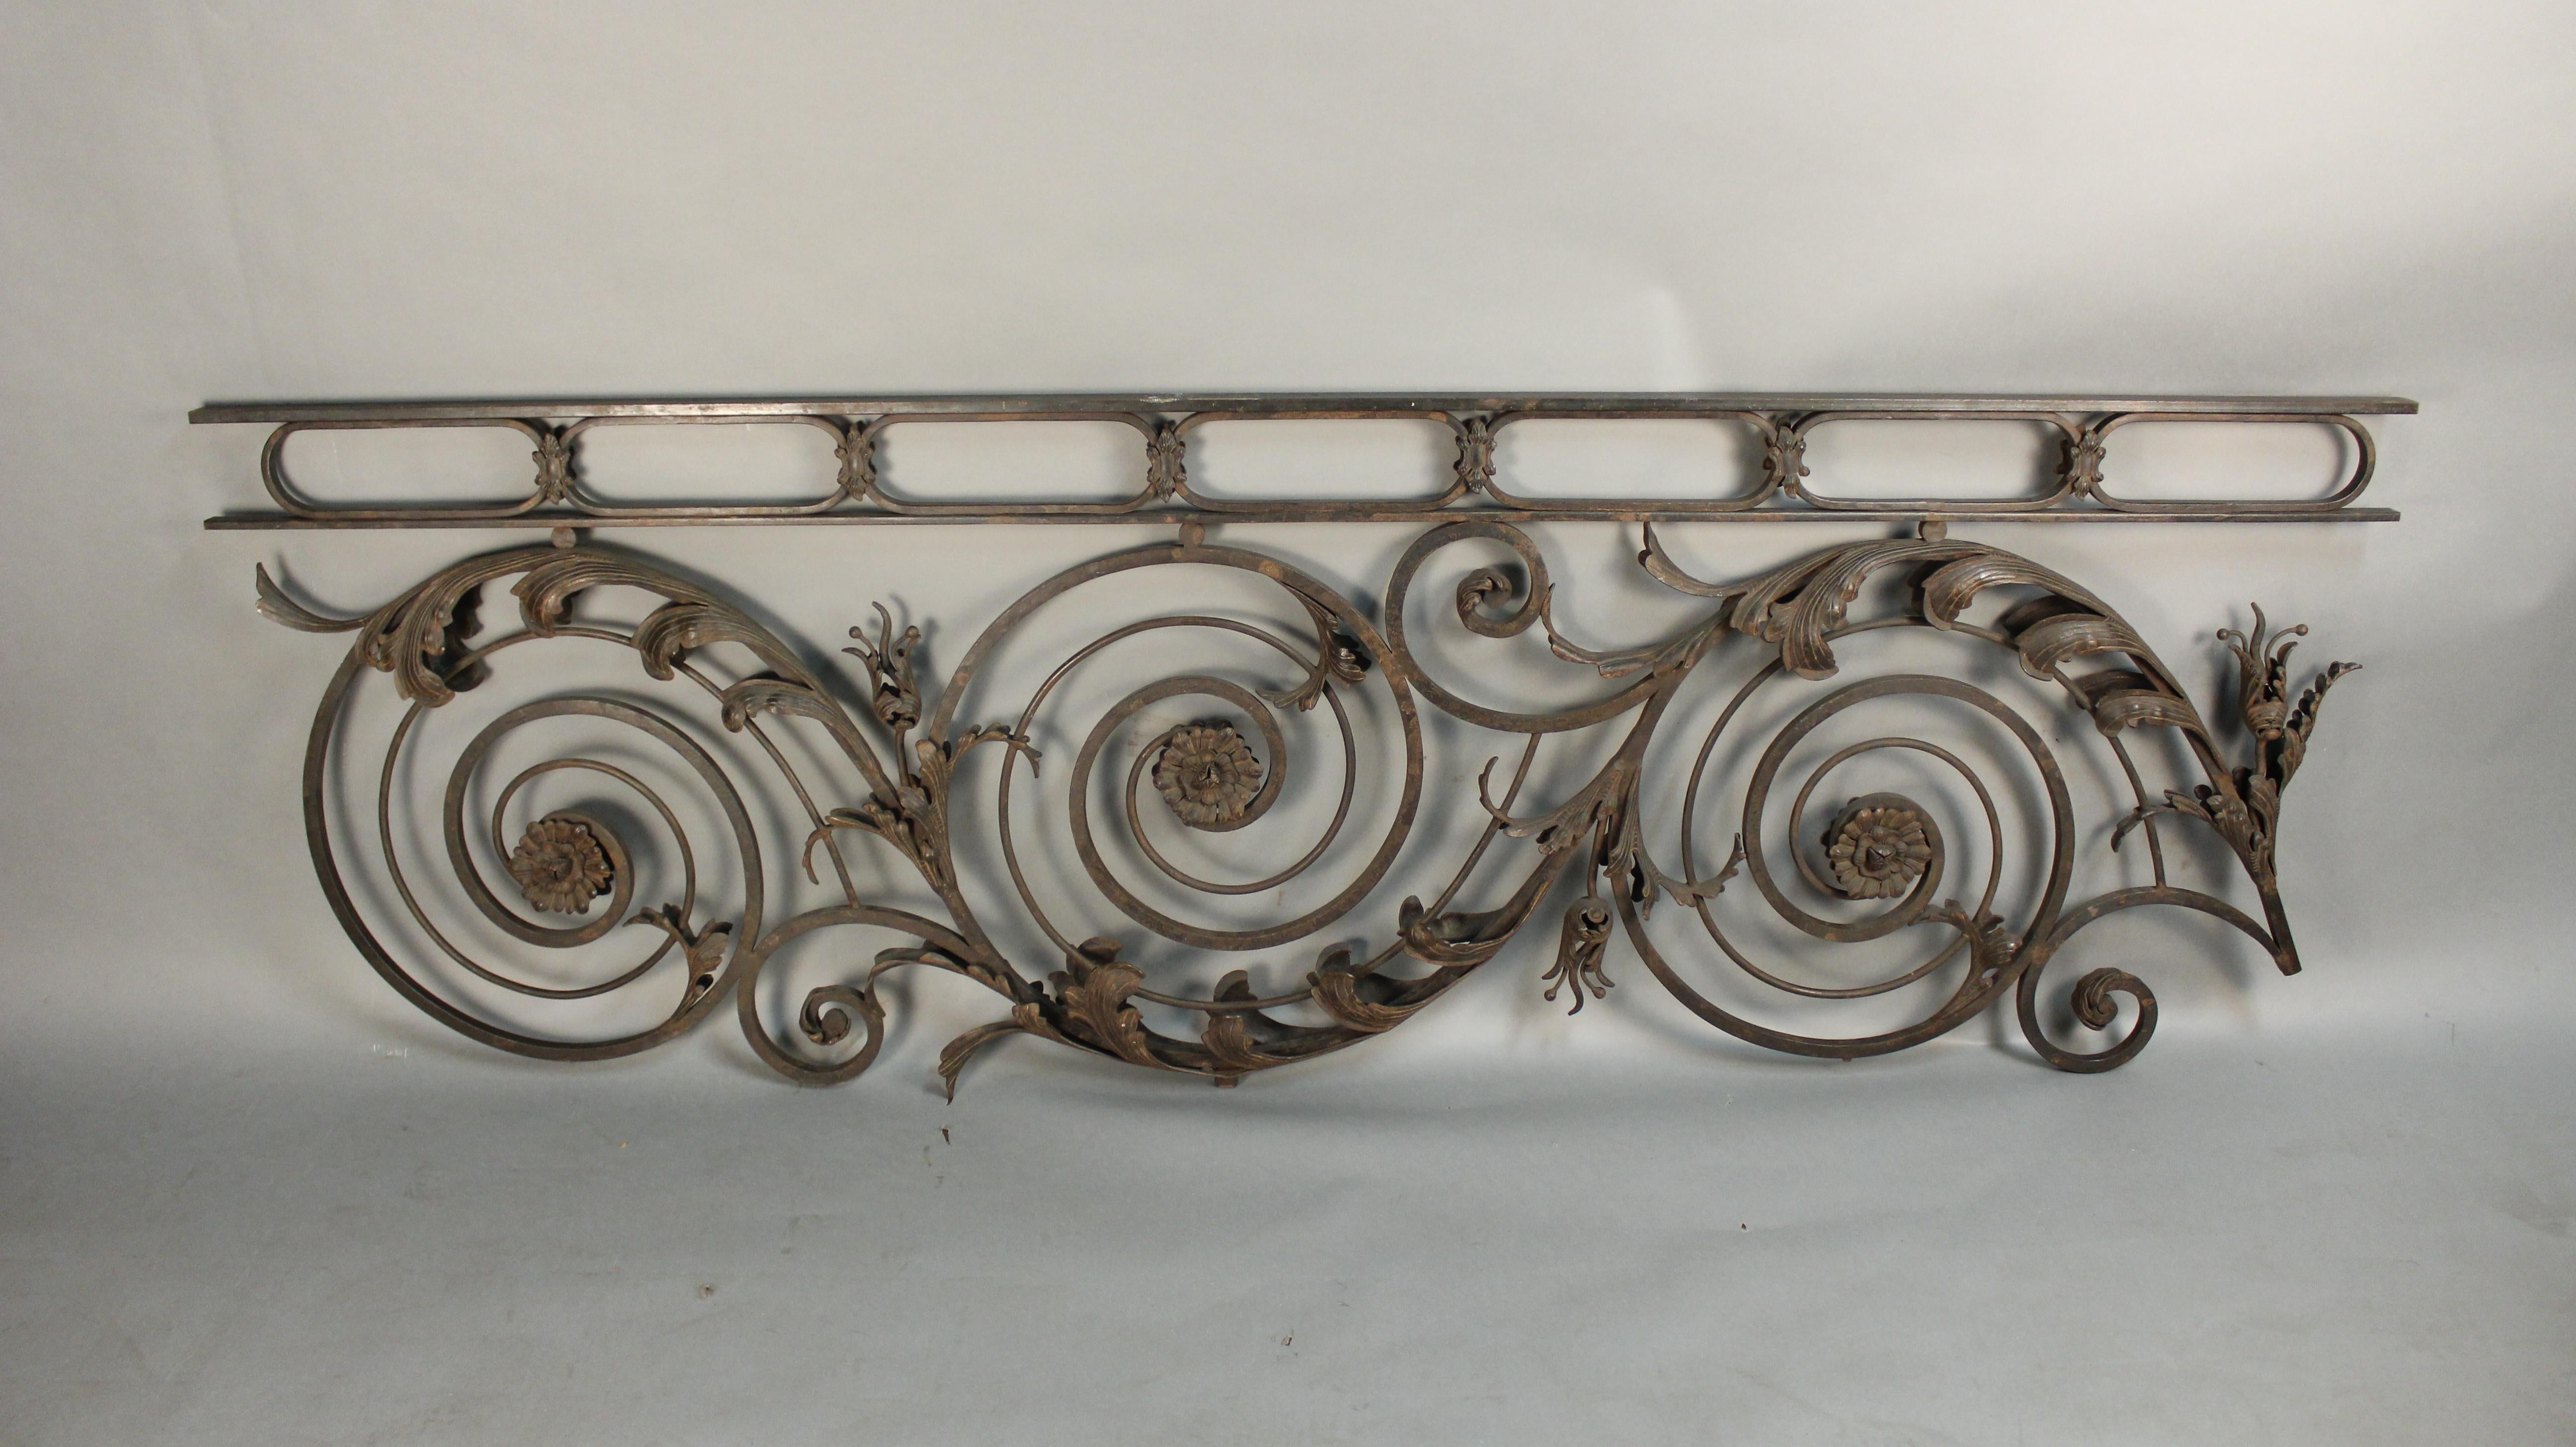 Early 20th Century Incredible 1920s Wrought Iron Architectural Element For Sale